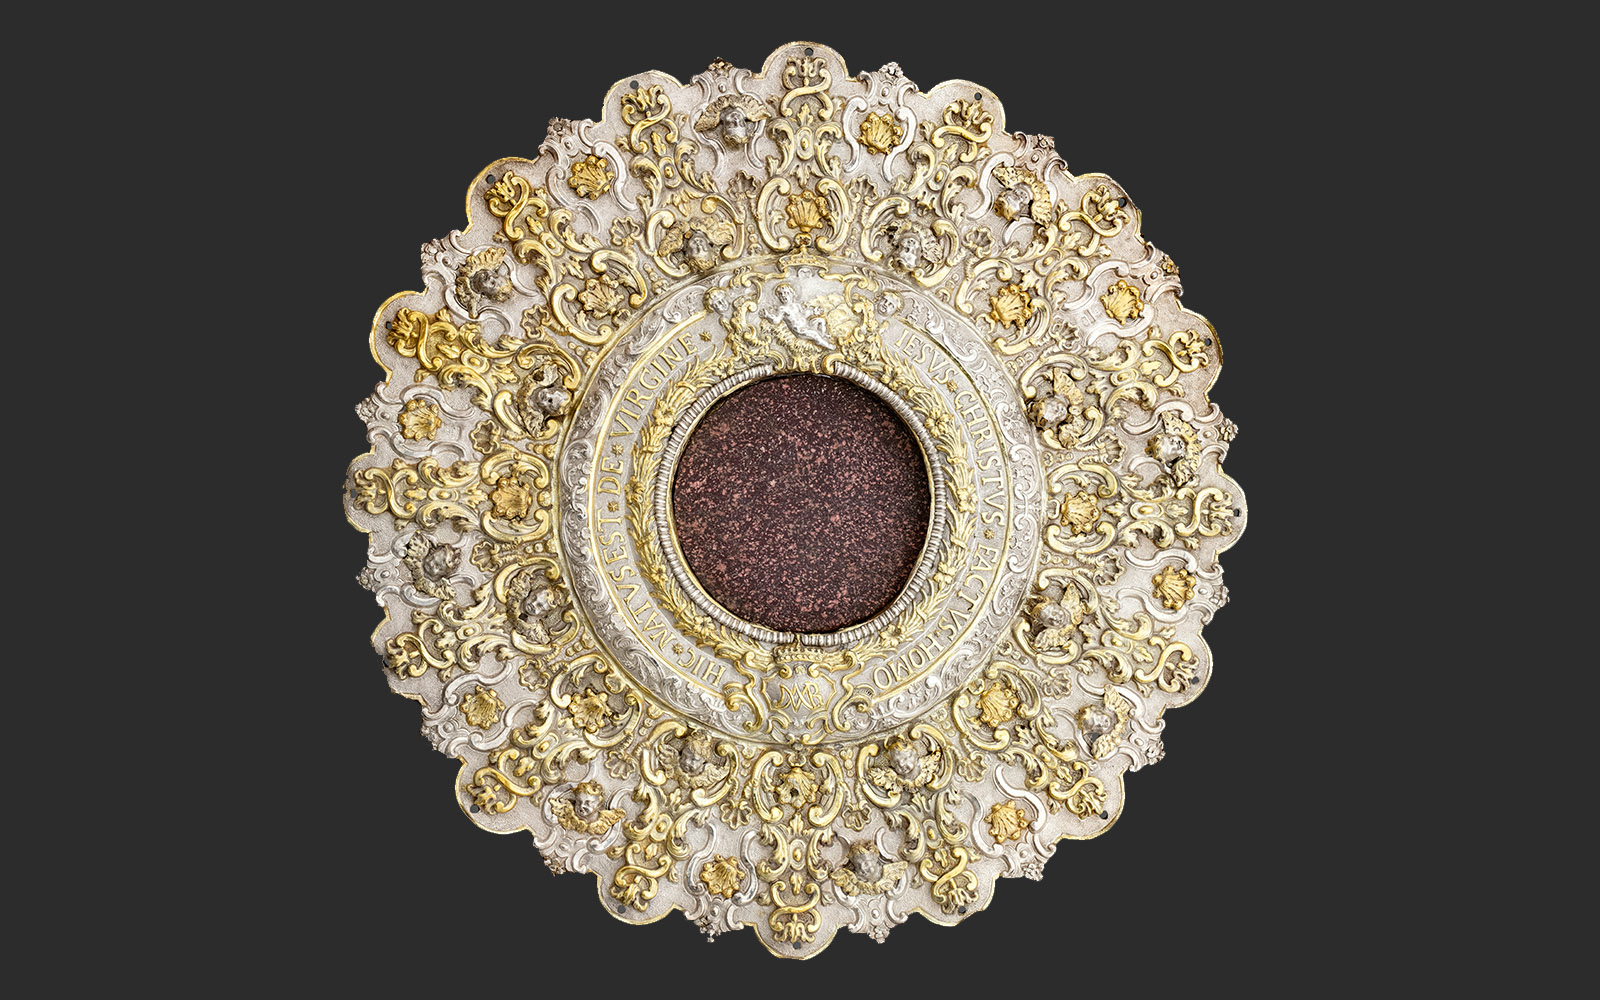 Silversmith ‘DG’, The Star of Bethlehem. Messina, 1739. Red porphyry, silver and silver gilt. Terra Sancta Museum, Jerusalem, inv. CTS-OA-25460. Photo: © Guillaume Benoit/ CTS